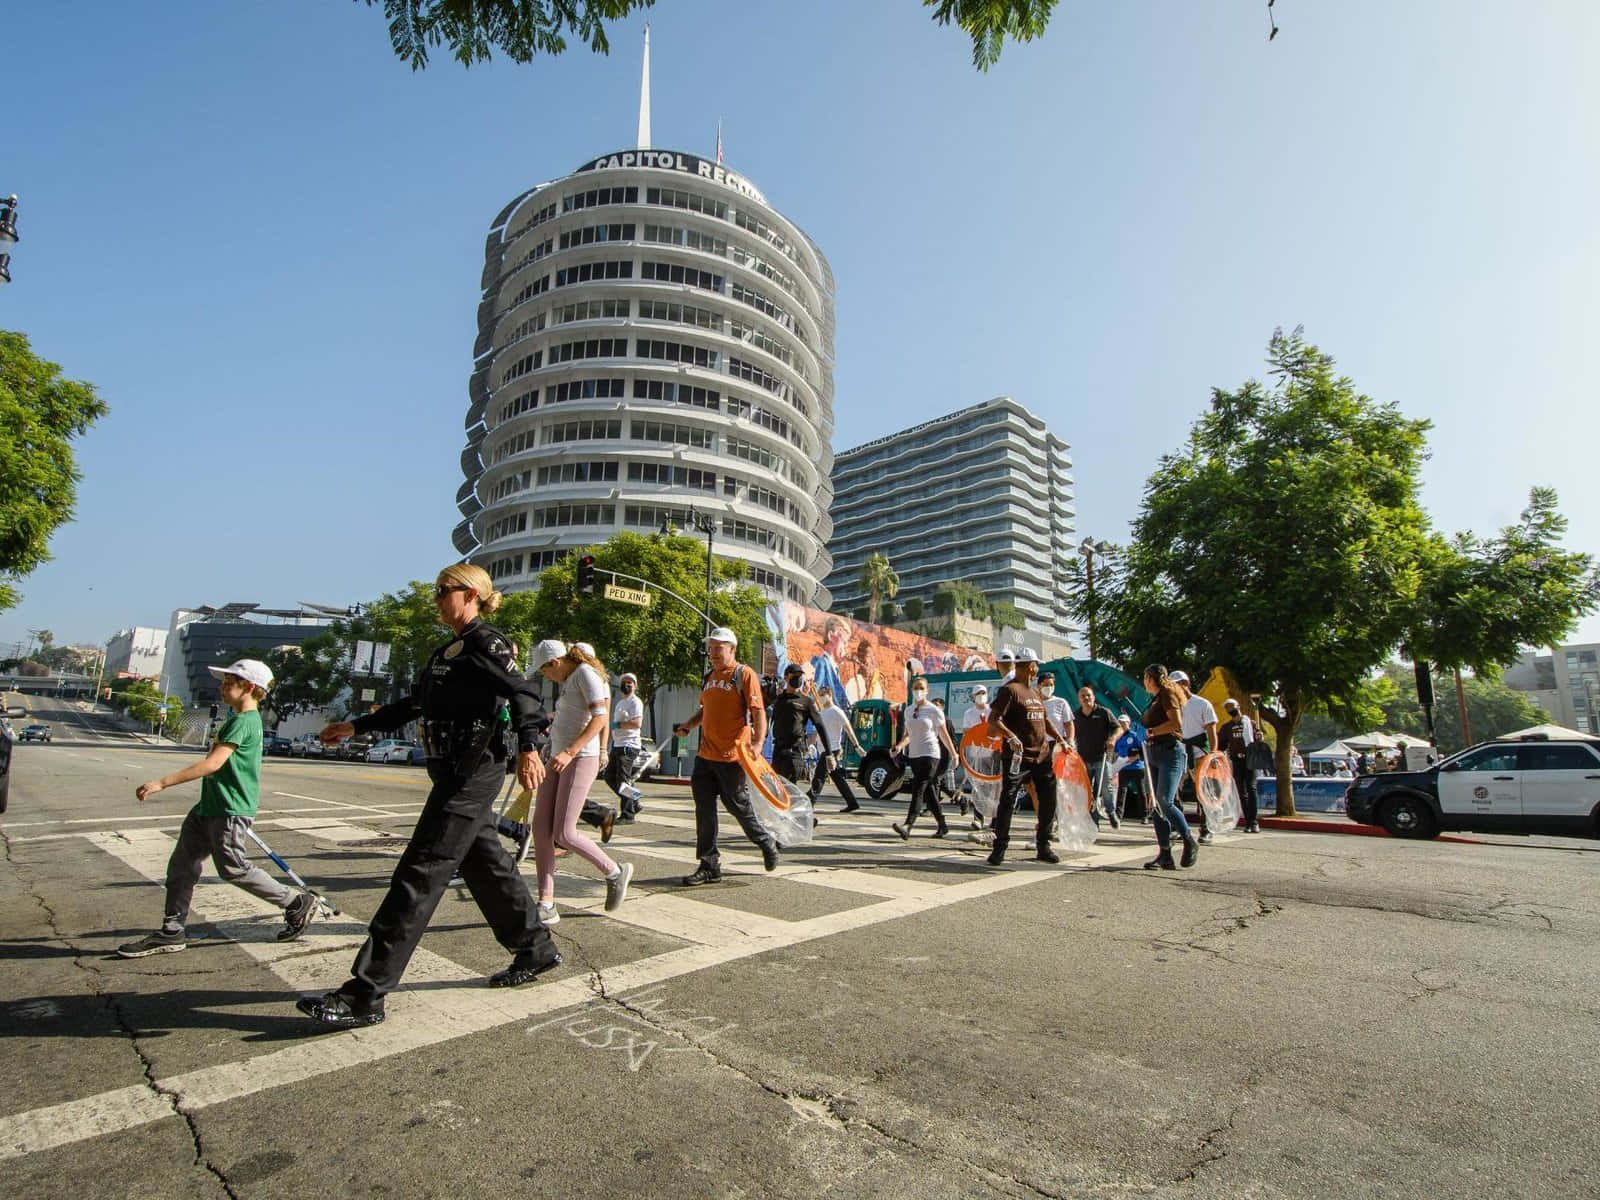 People On The Streets Of Capitol Records Building Wallpaper